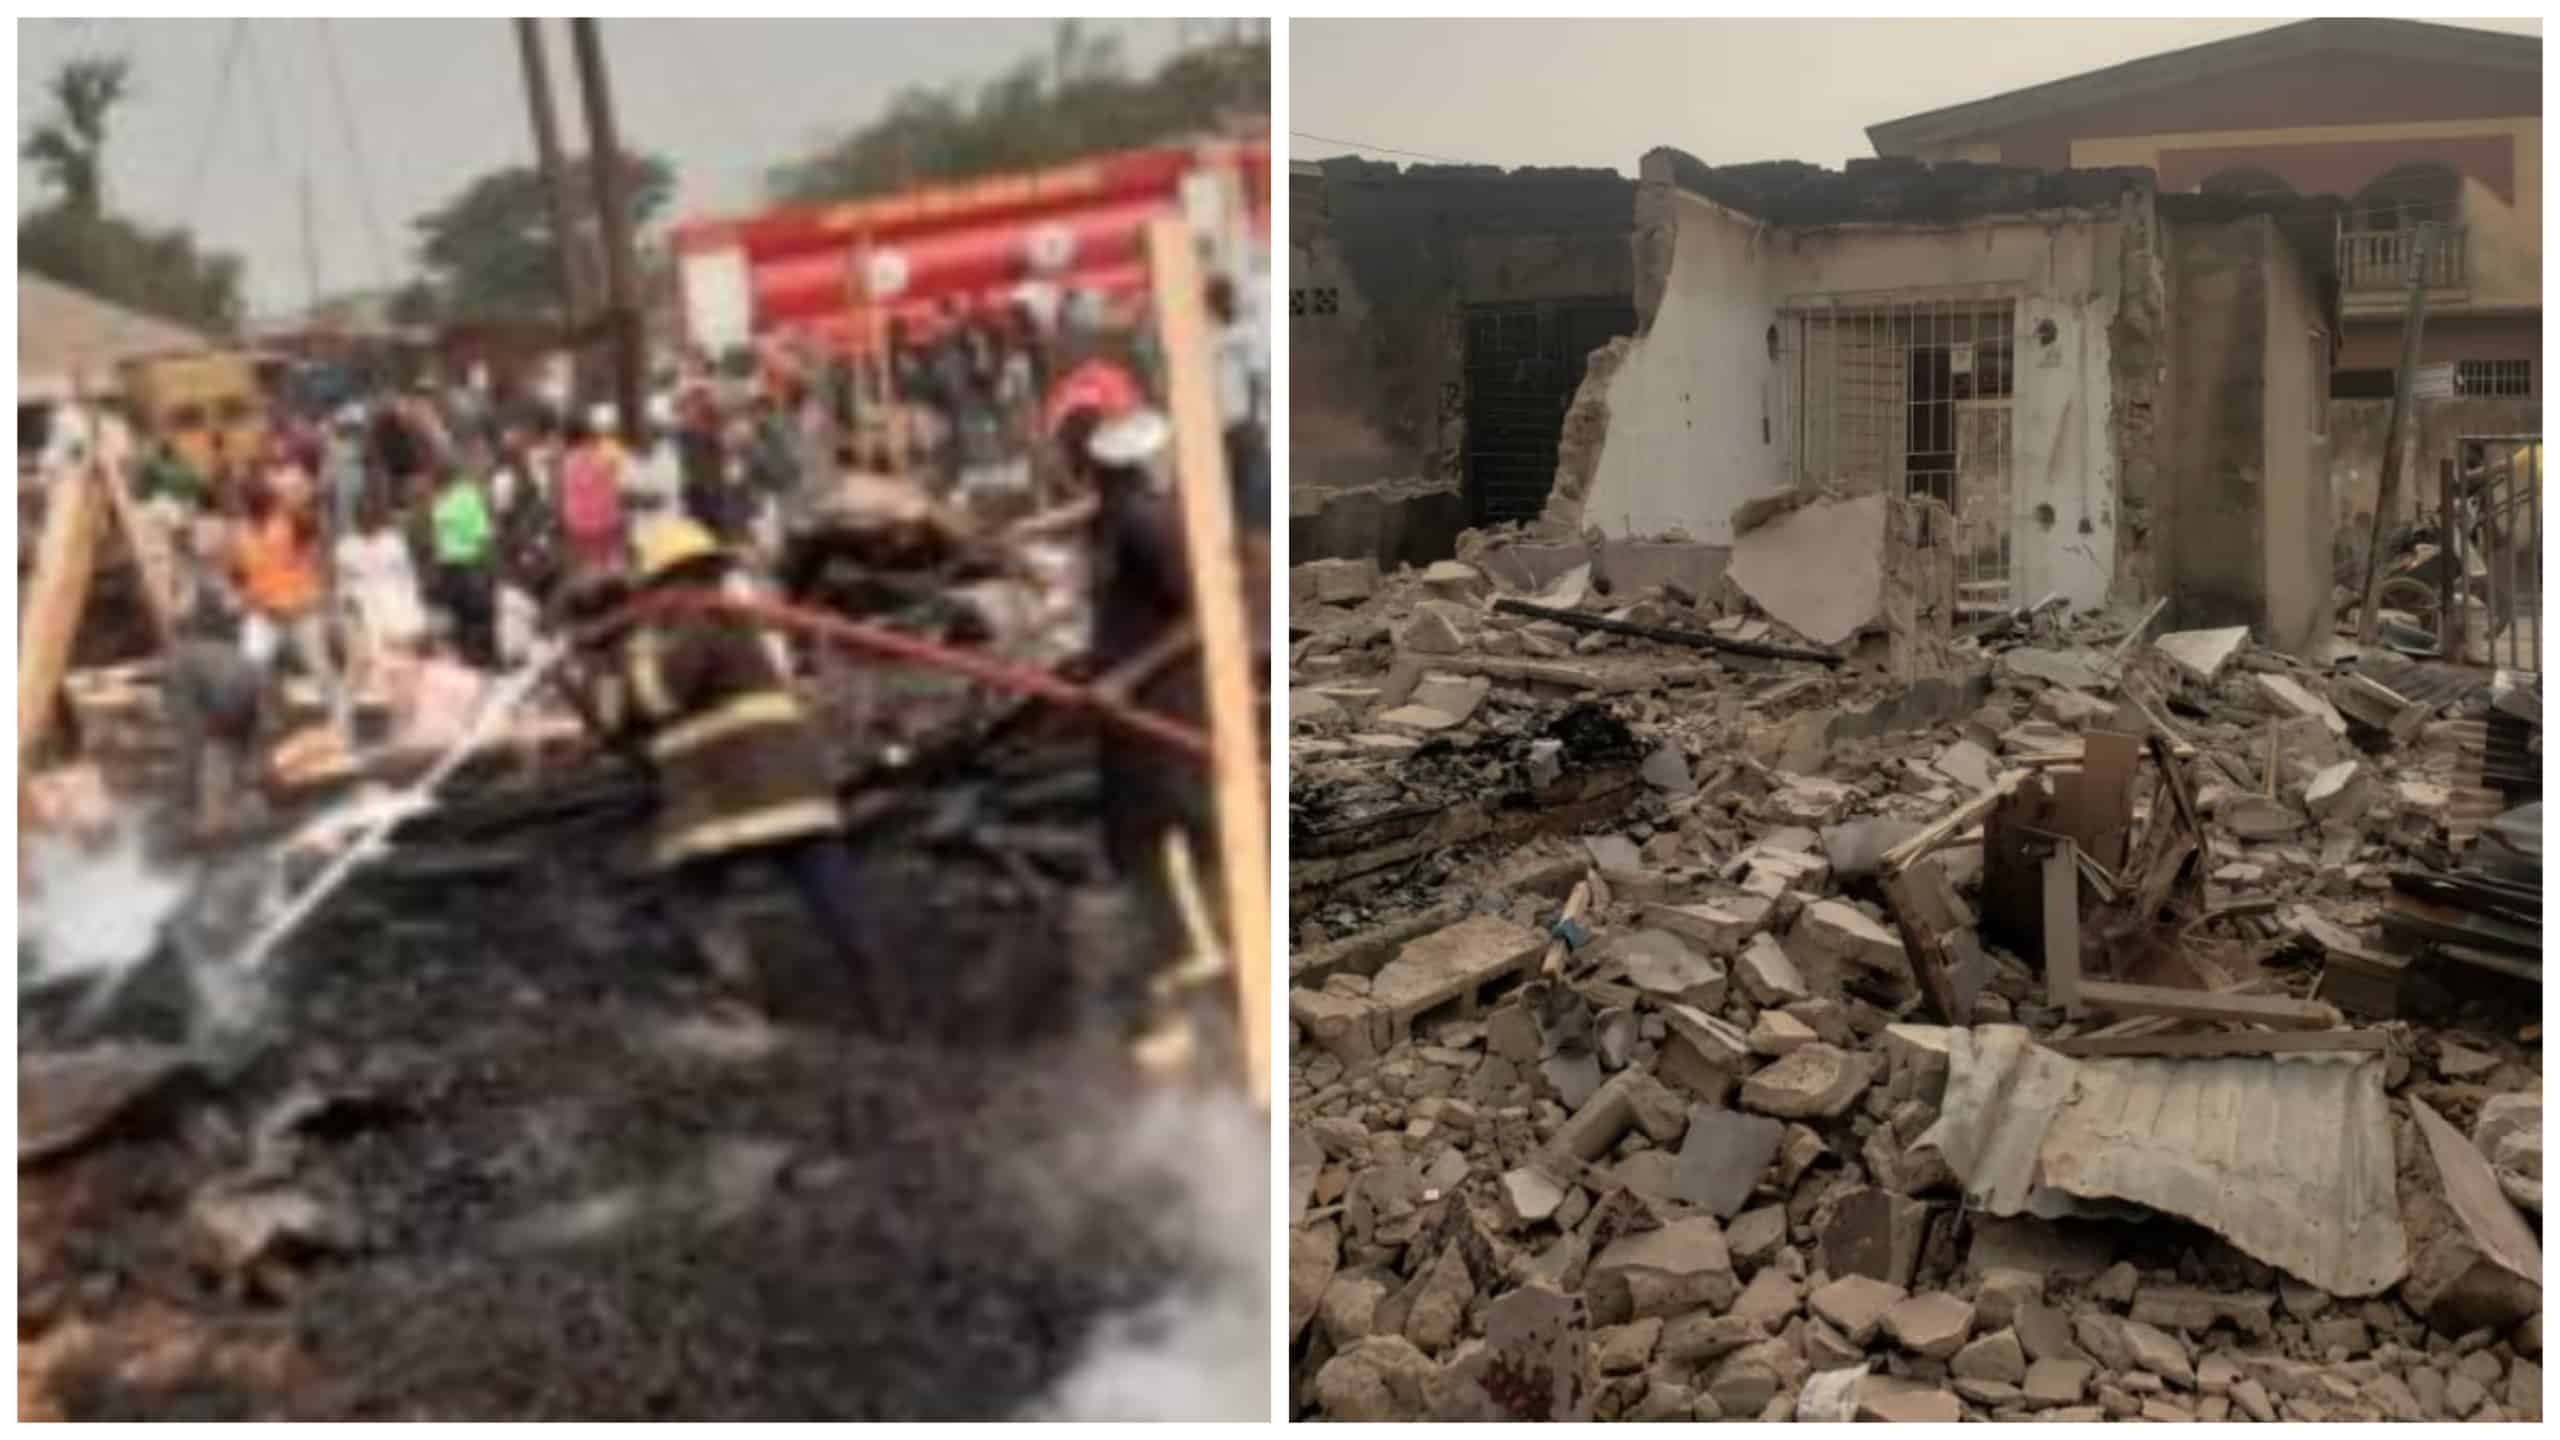 4-Year-Old Girl, Grandparents In Critical Condition As Explosion Razes 3-Storey Building In Lagos